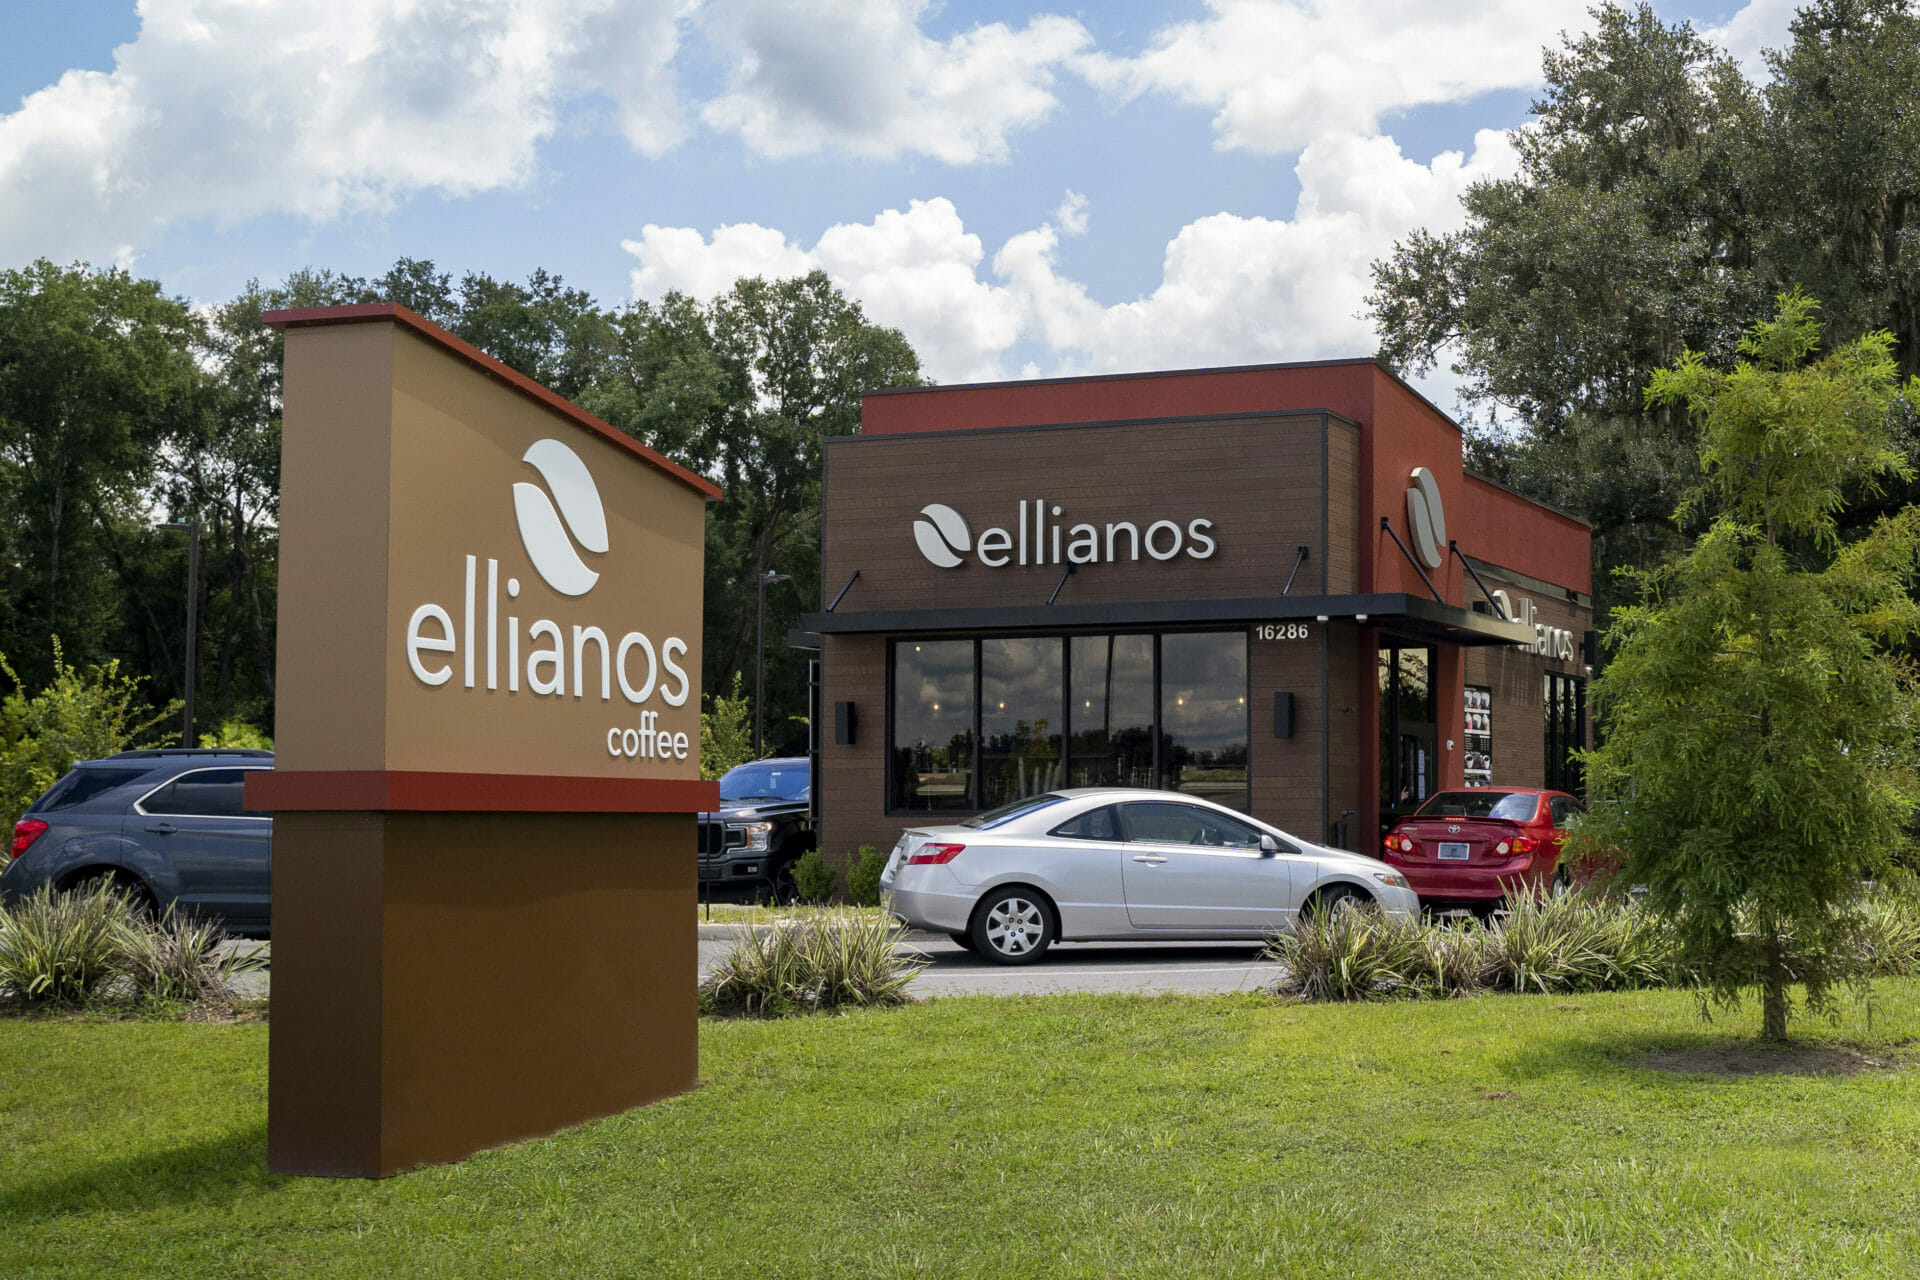 Ellianos Coffee Ranked Among Top Franchises in Entrepreneur’s Highly Competitive Franchise 500